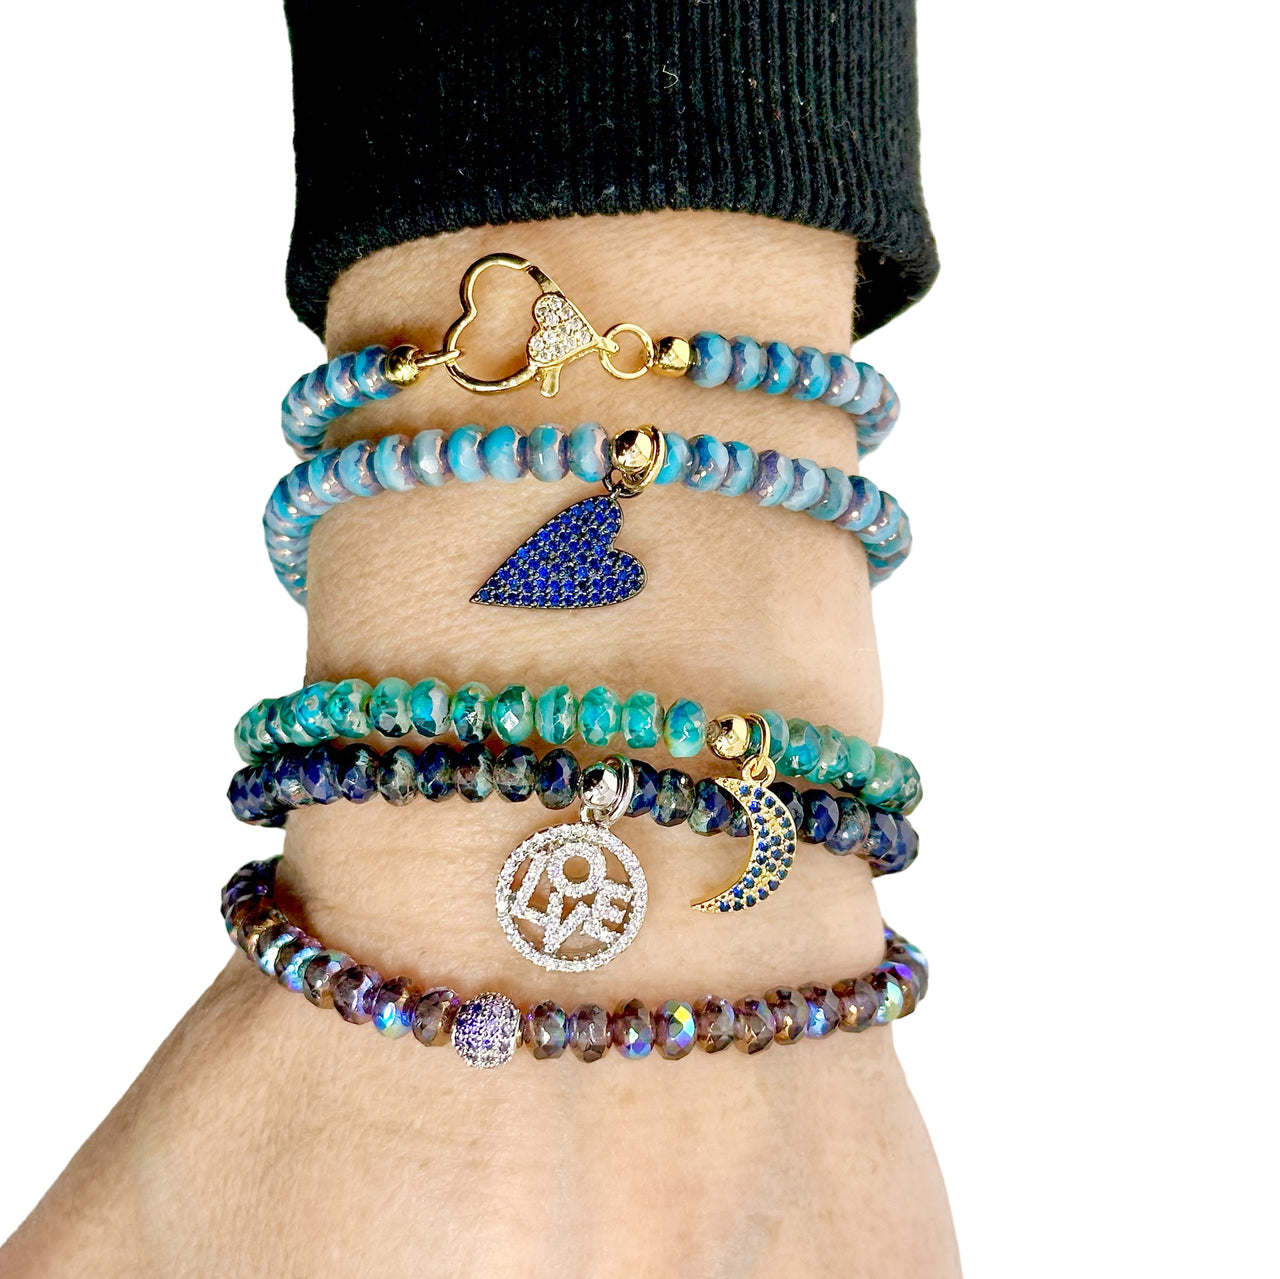 Harper Love You To The Moon Collection of Bracelets